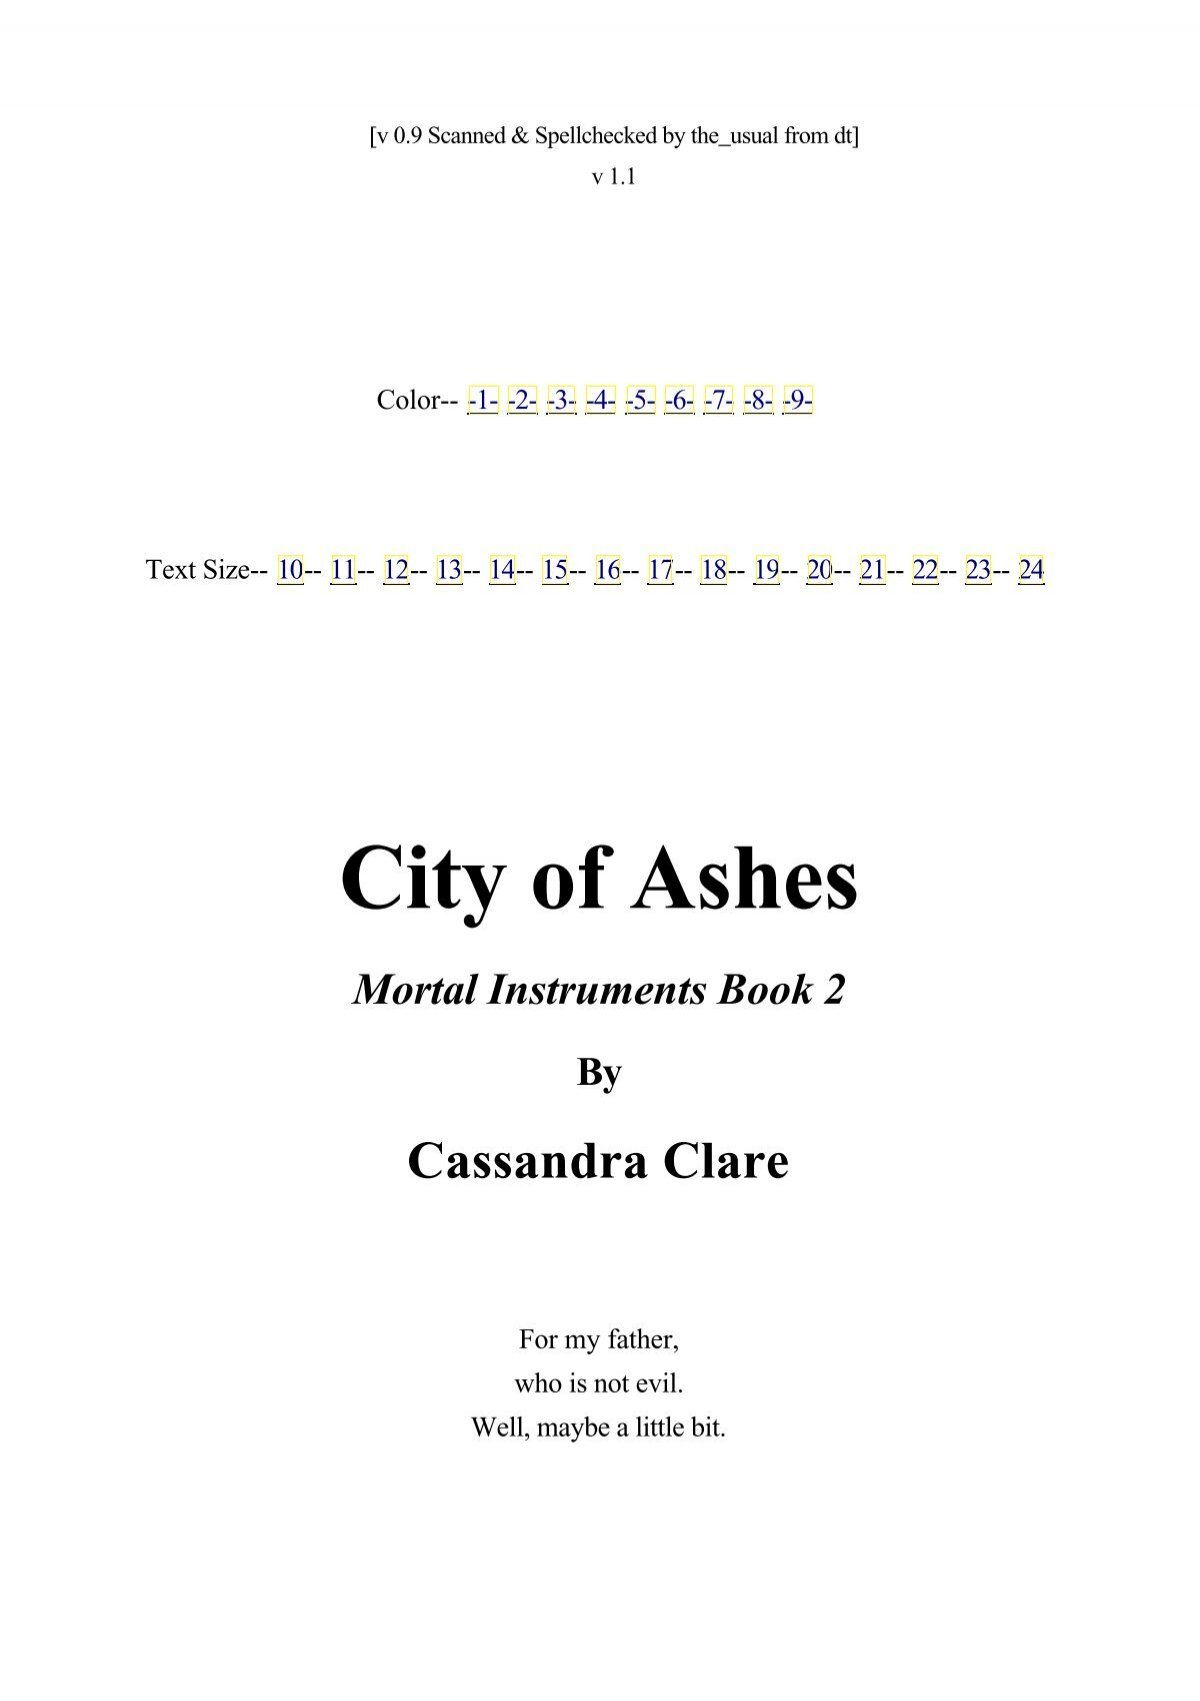 Cassandra Clare Mortal Instruments 02 City Of Ashes